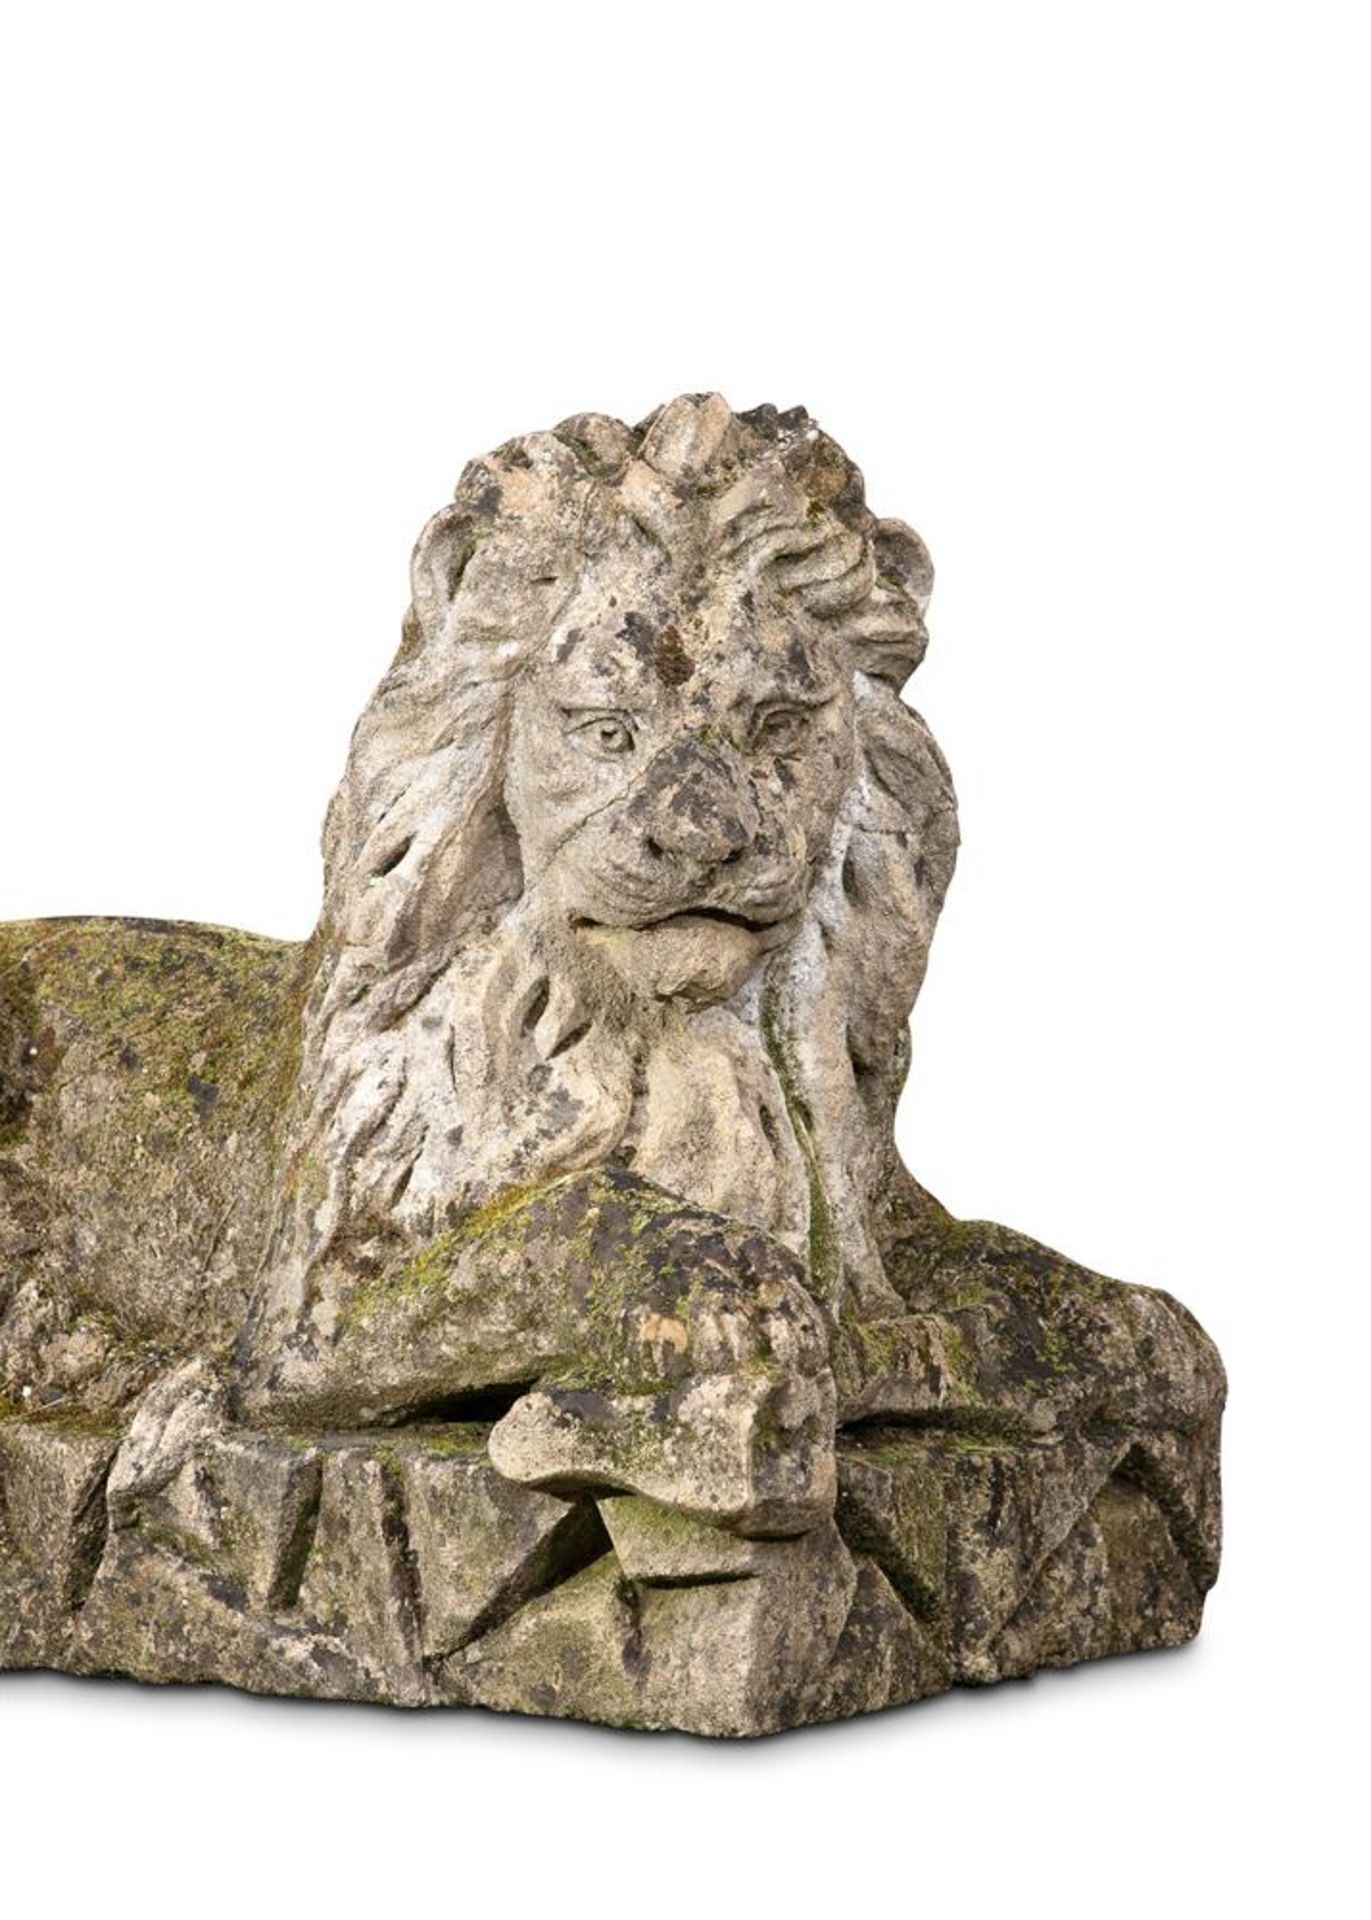 A LARGE AND IMPRESSIVE PAIR OF CARVED BATH STONE RECUMBENT LIONS, EARLY 19TH CENTURY - Image 4 of 5